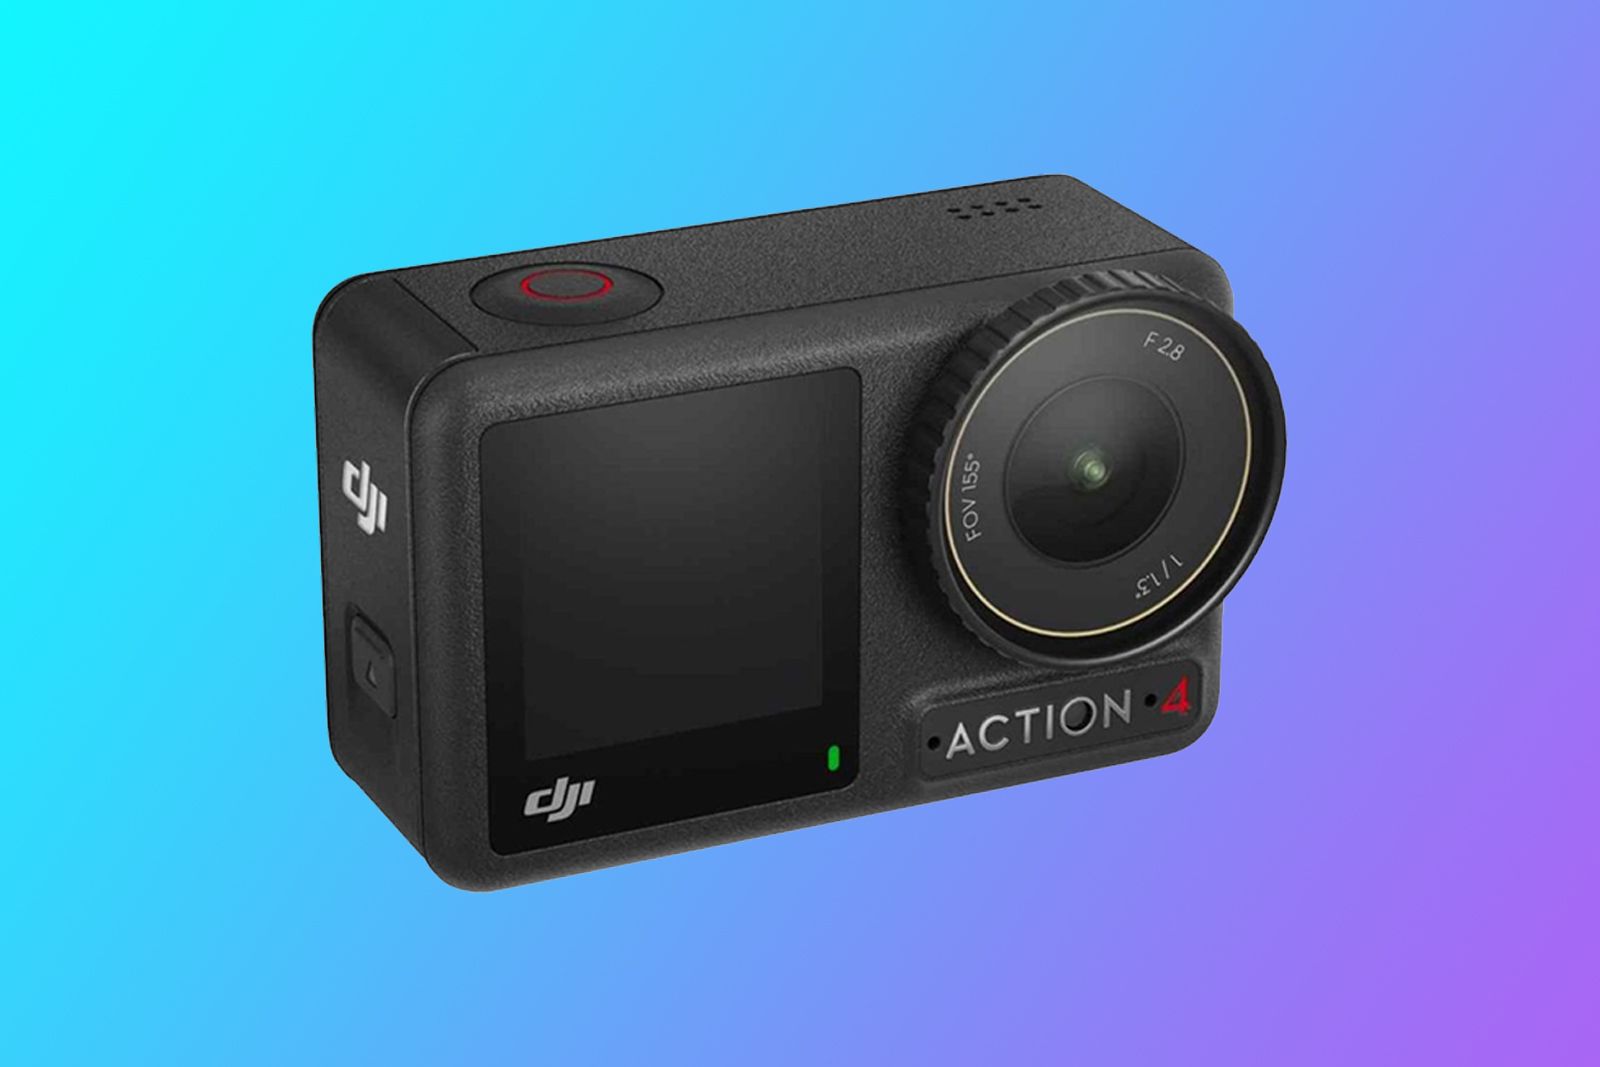 DJI Osmo Action 4 vs GoPro Hero 11 Black: Which one should you get?